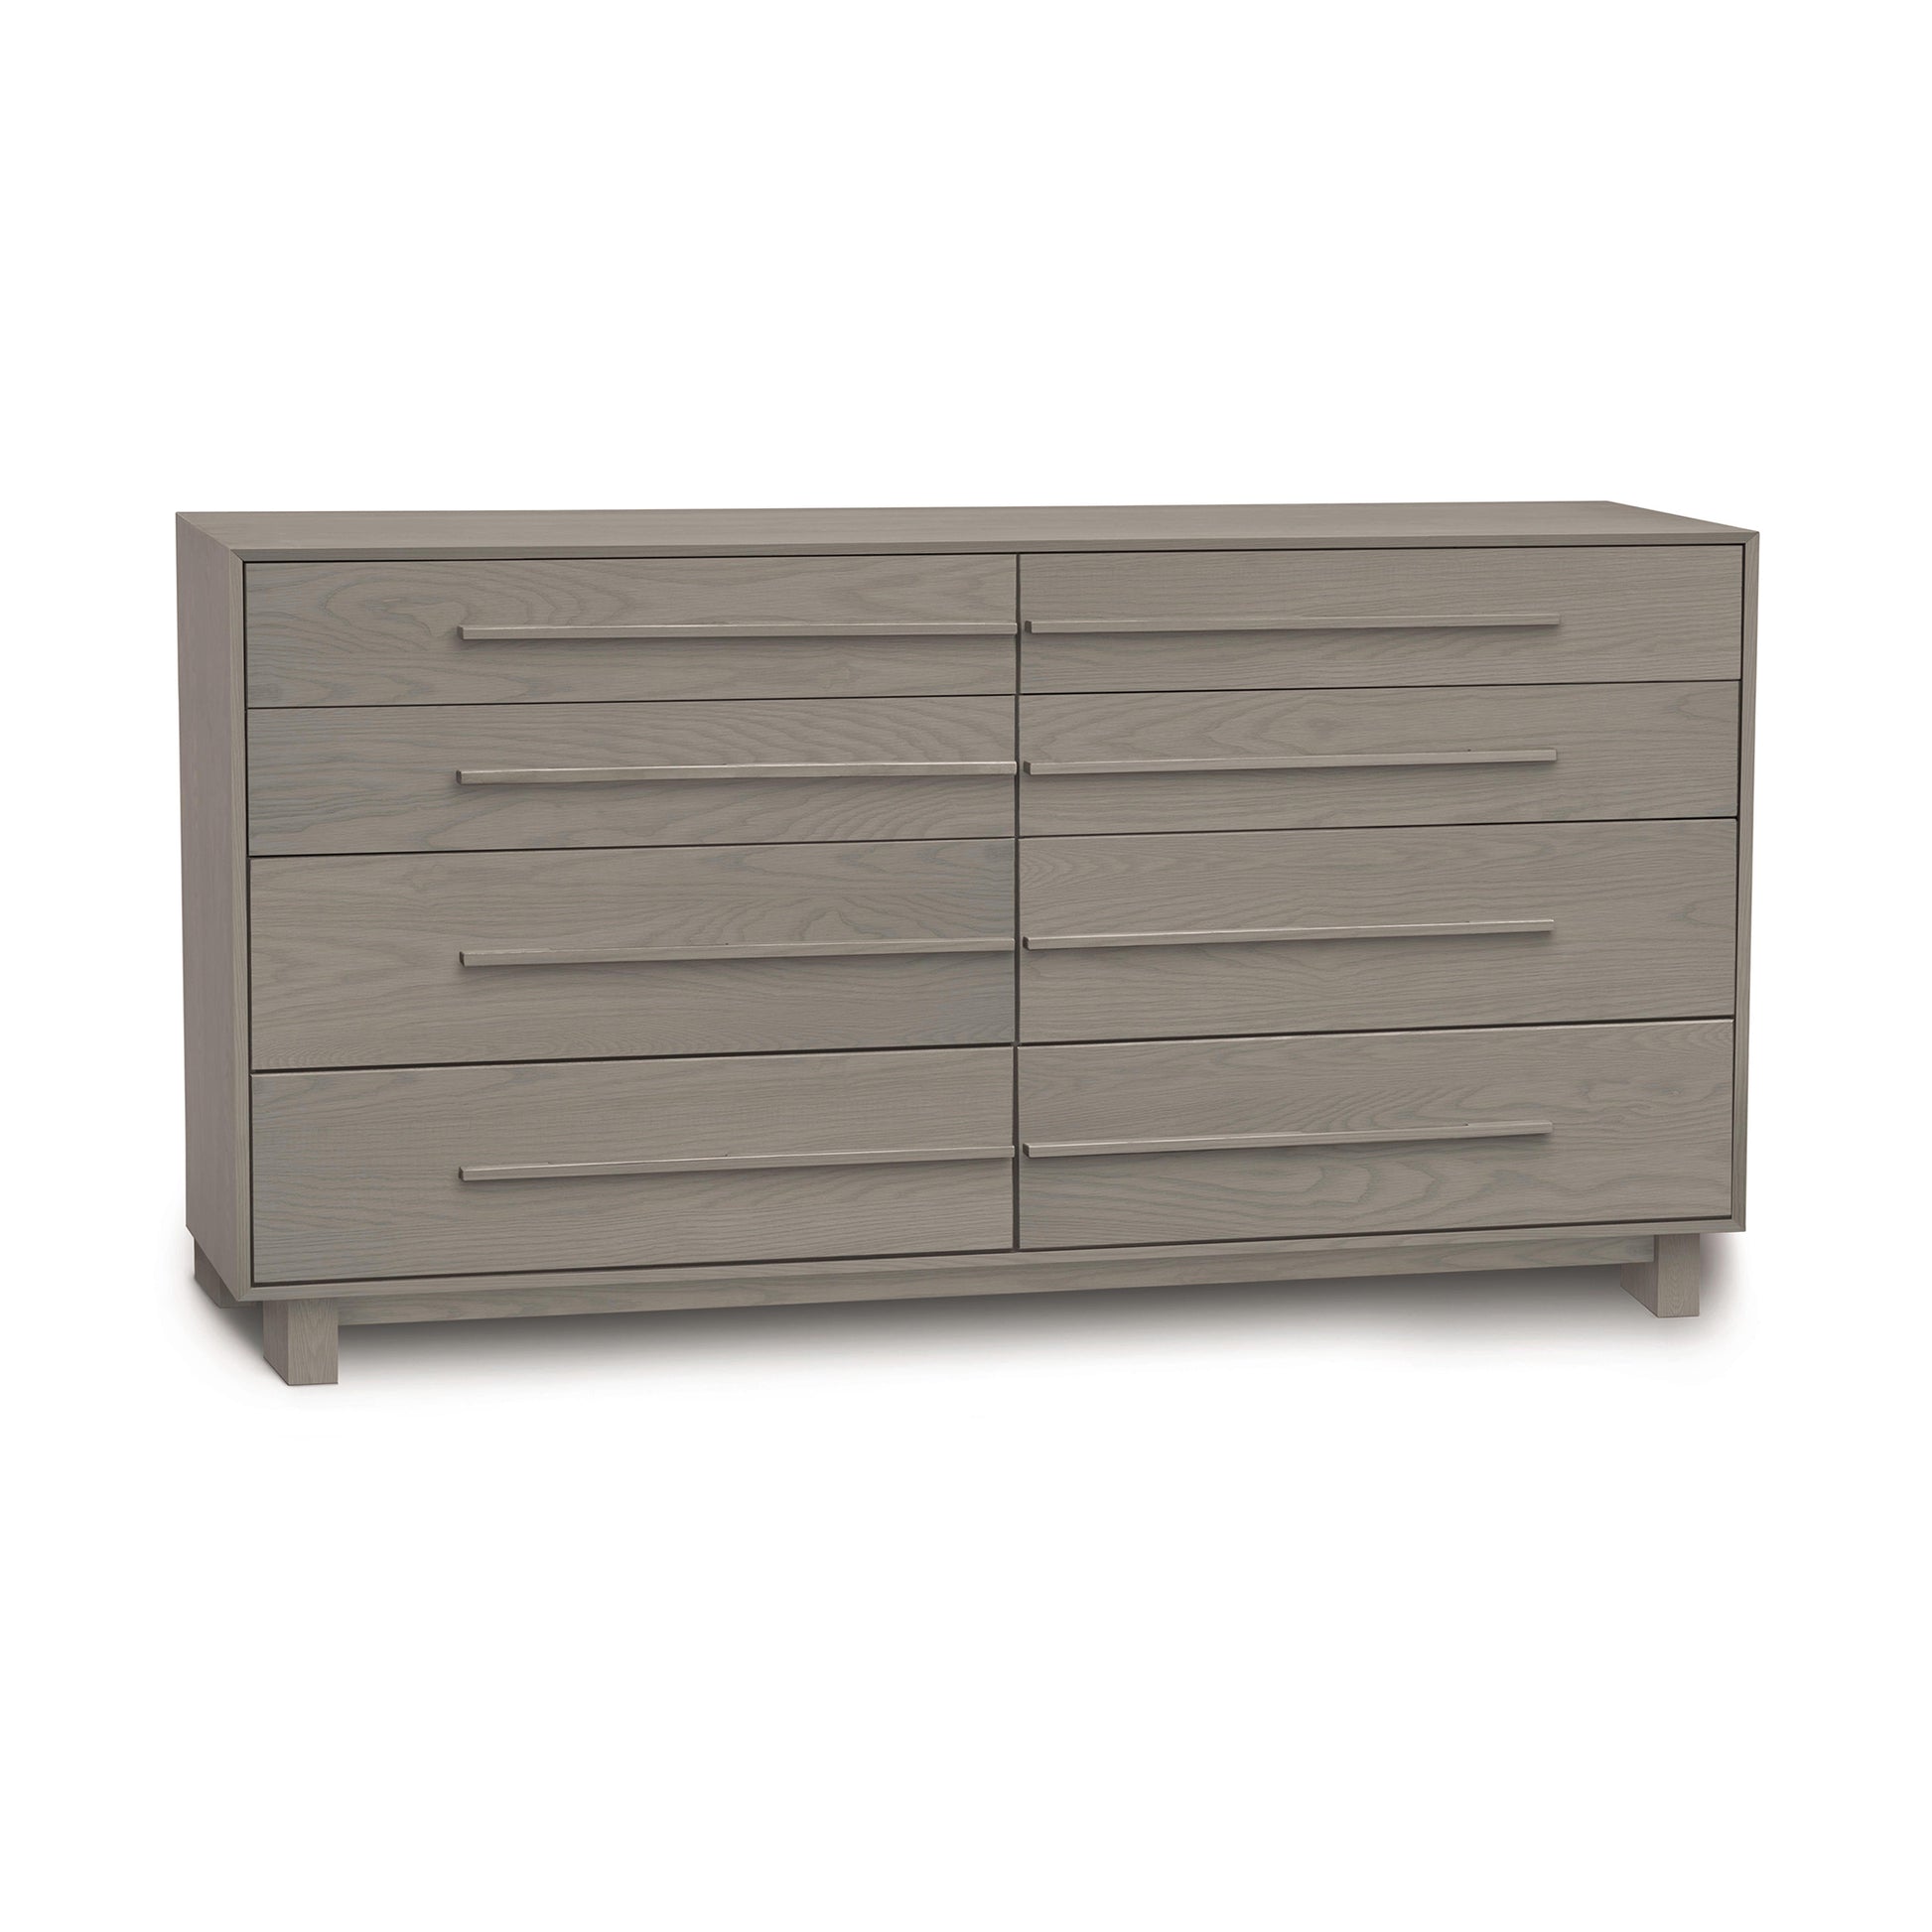 The Copeland Furniture Sloane 8-Drawer Dresser, a gray dresser with drawers, adds contemporary style to any bedroom setting.